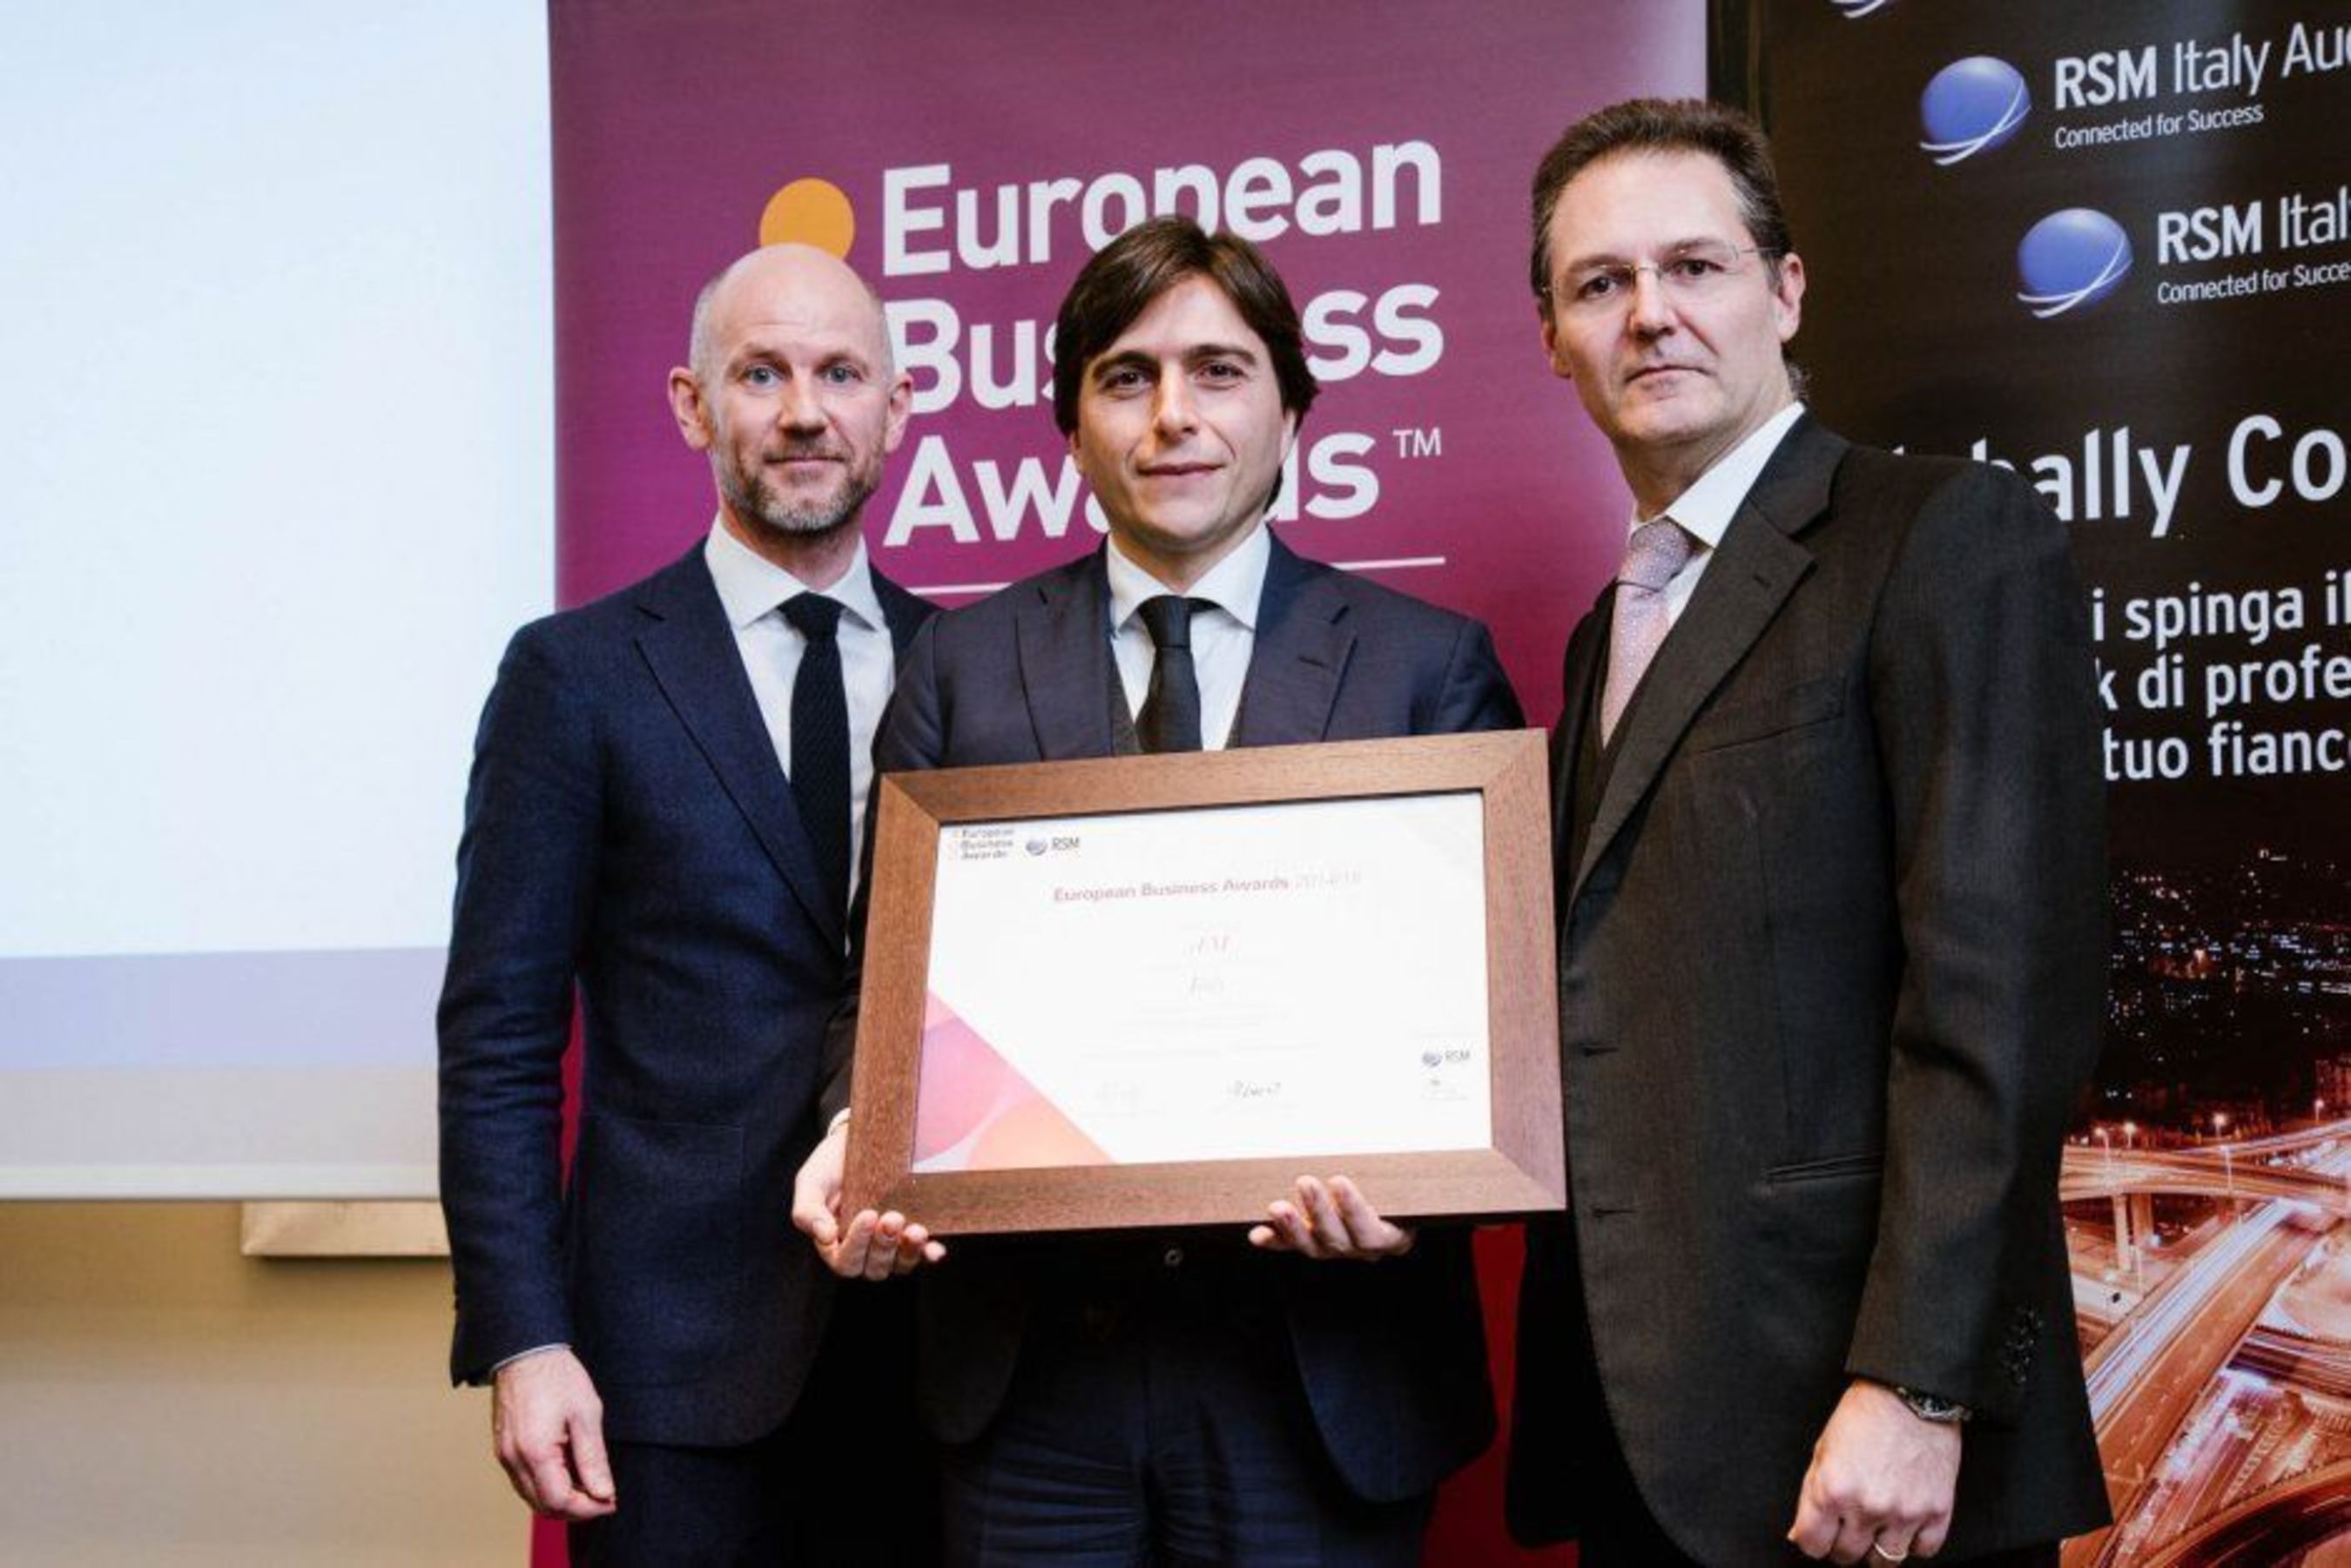 eFM is a success story in Europe: promoting youth, talent, innovation and hope. eFM has been recognized as National Champion within the European Business Awards. The award discovers companies that have achieved excellent results and distinguished themselves as leaders. eFM, an engineering company focused on Real Estate, Facility Management and Smart Cities, is competing for its entrepreneurial skills and the courage to find new ways to succeed. Support courage, innovation, youth and start-ups. (PRNewsFoto/eFM Srl)